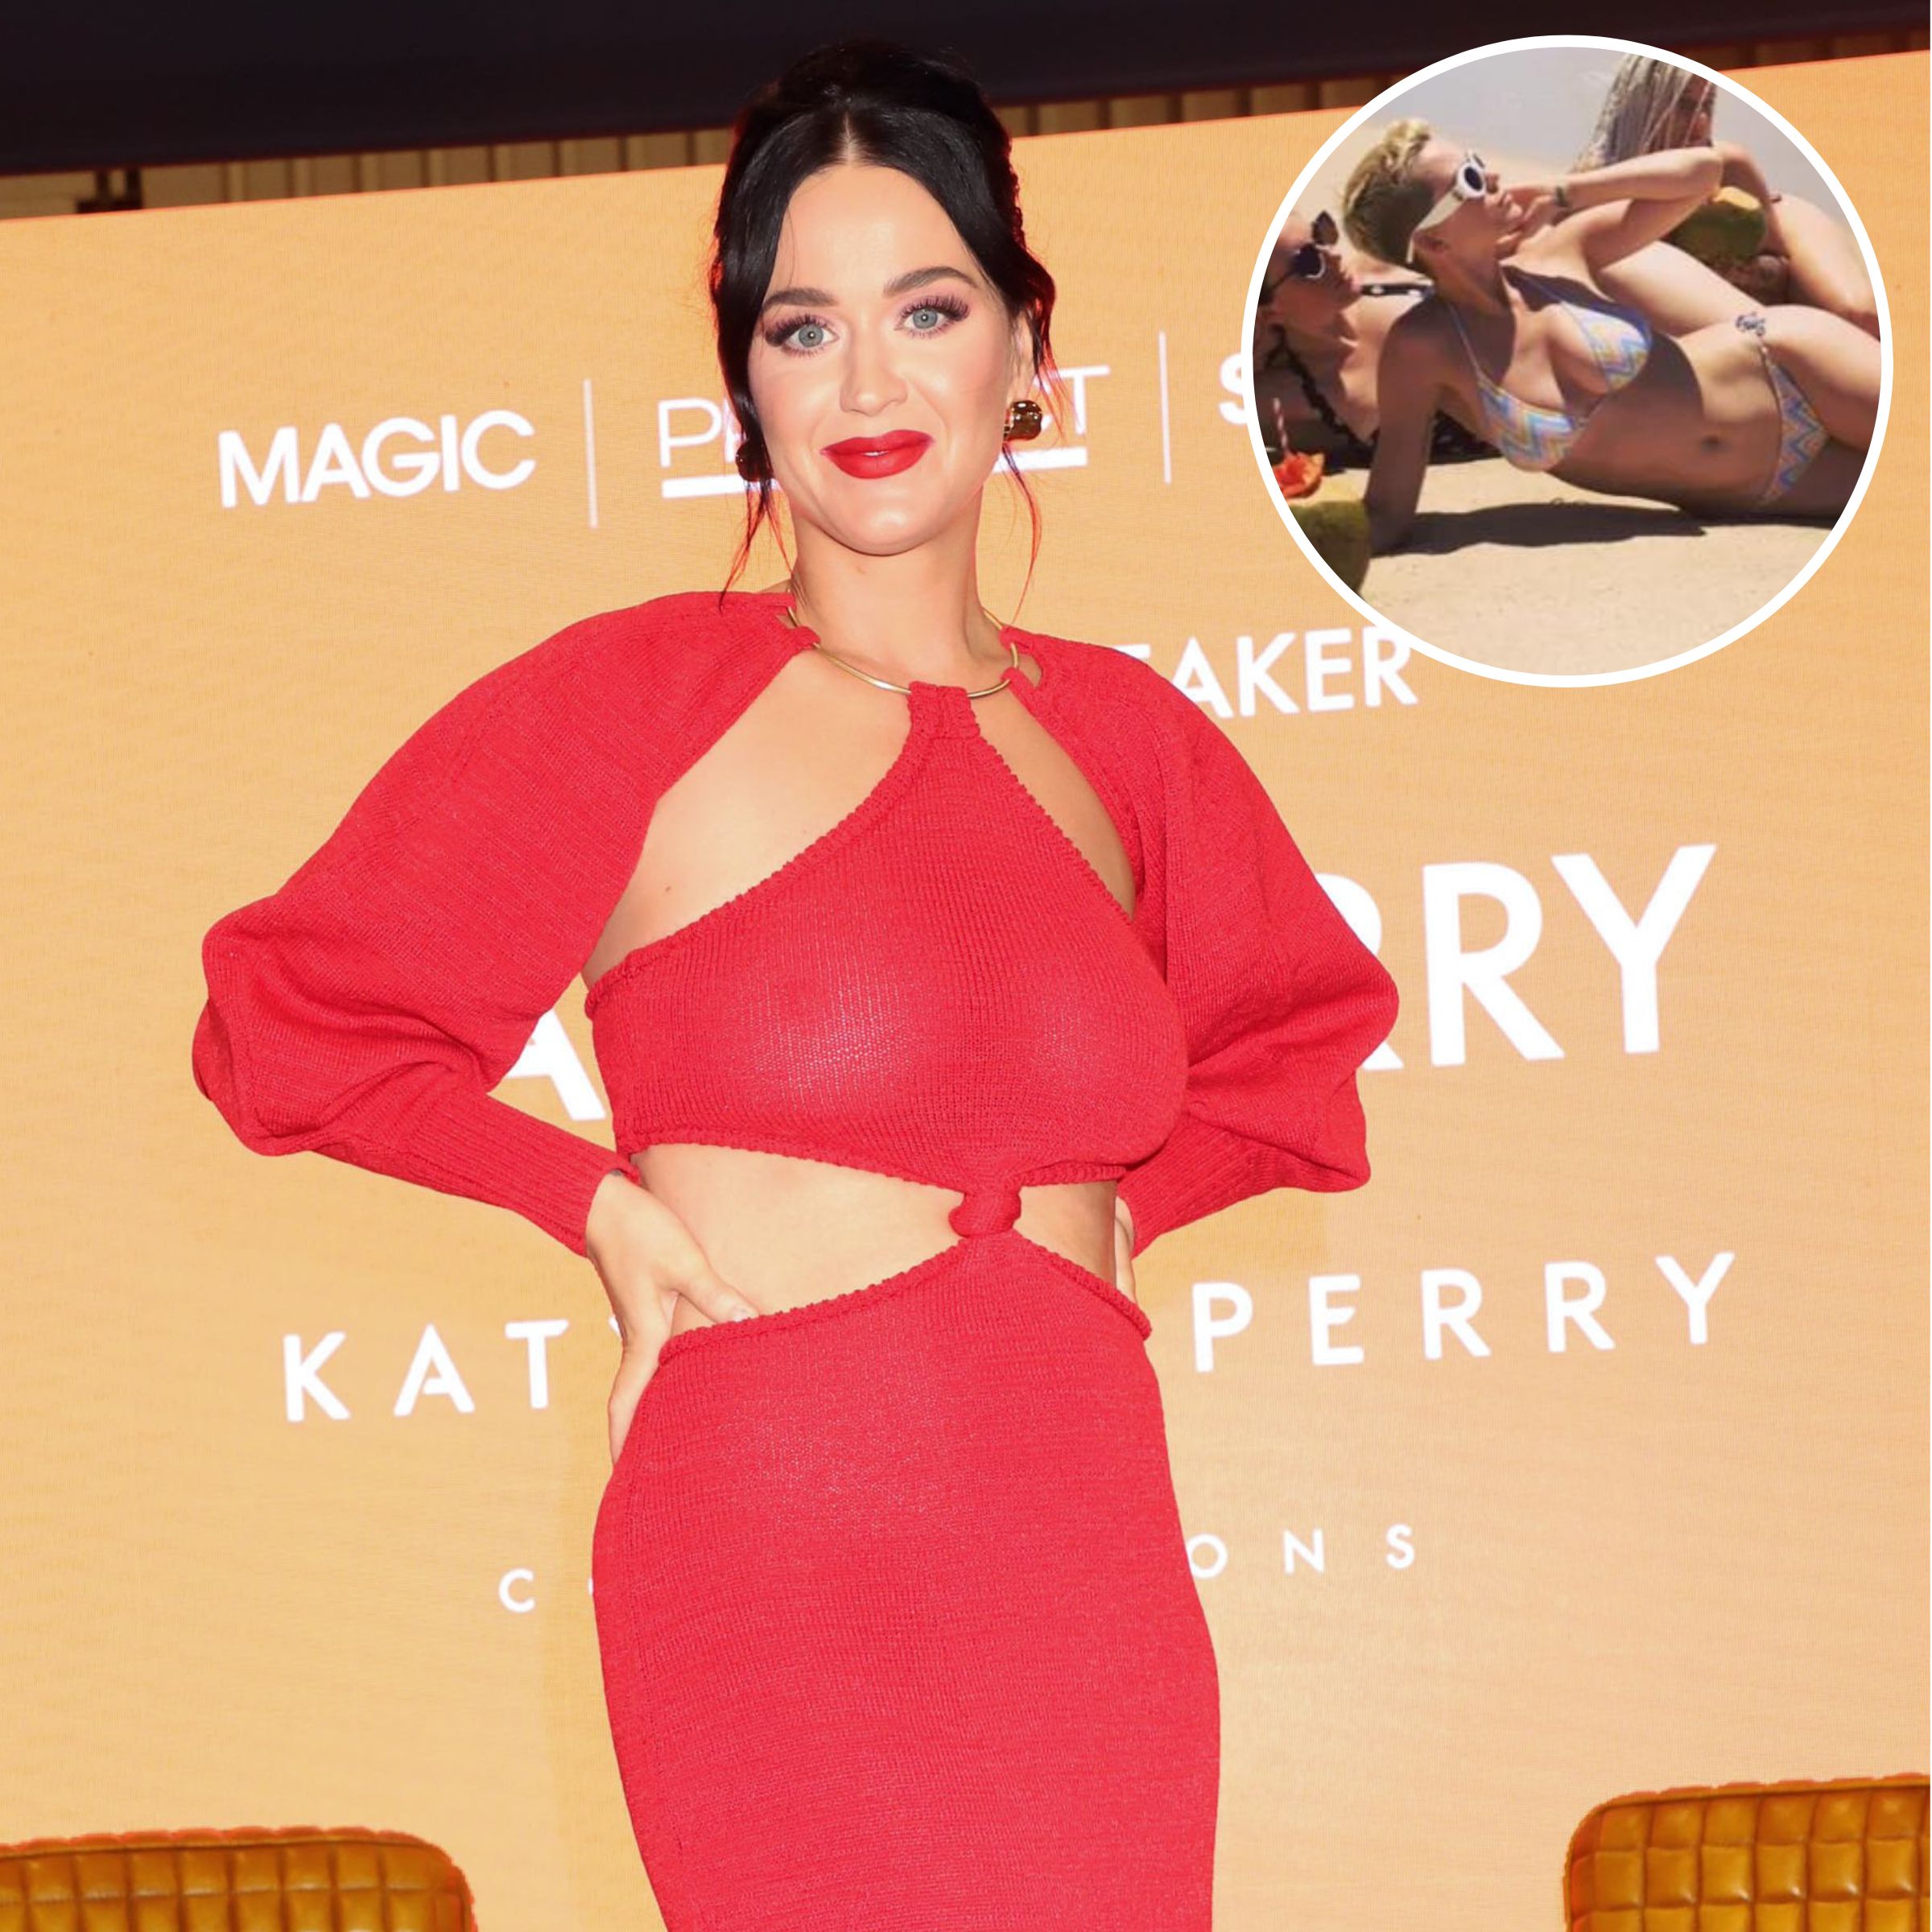 Katy Perry Bikini Photos: Her Hottest Swimsuit Moments